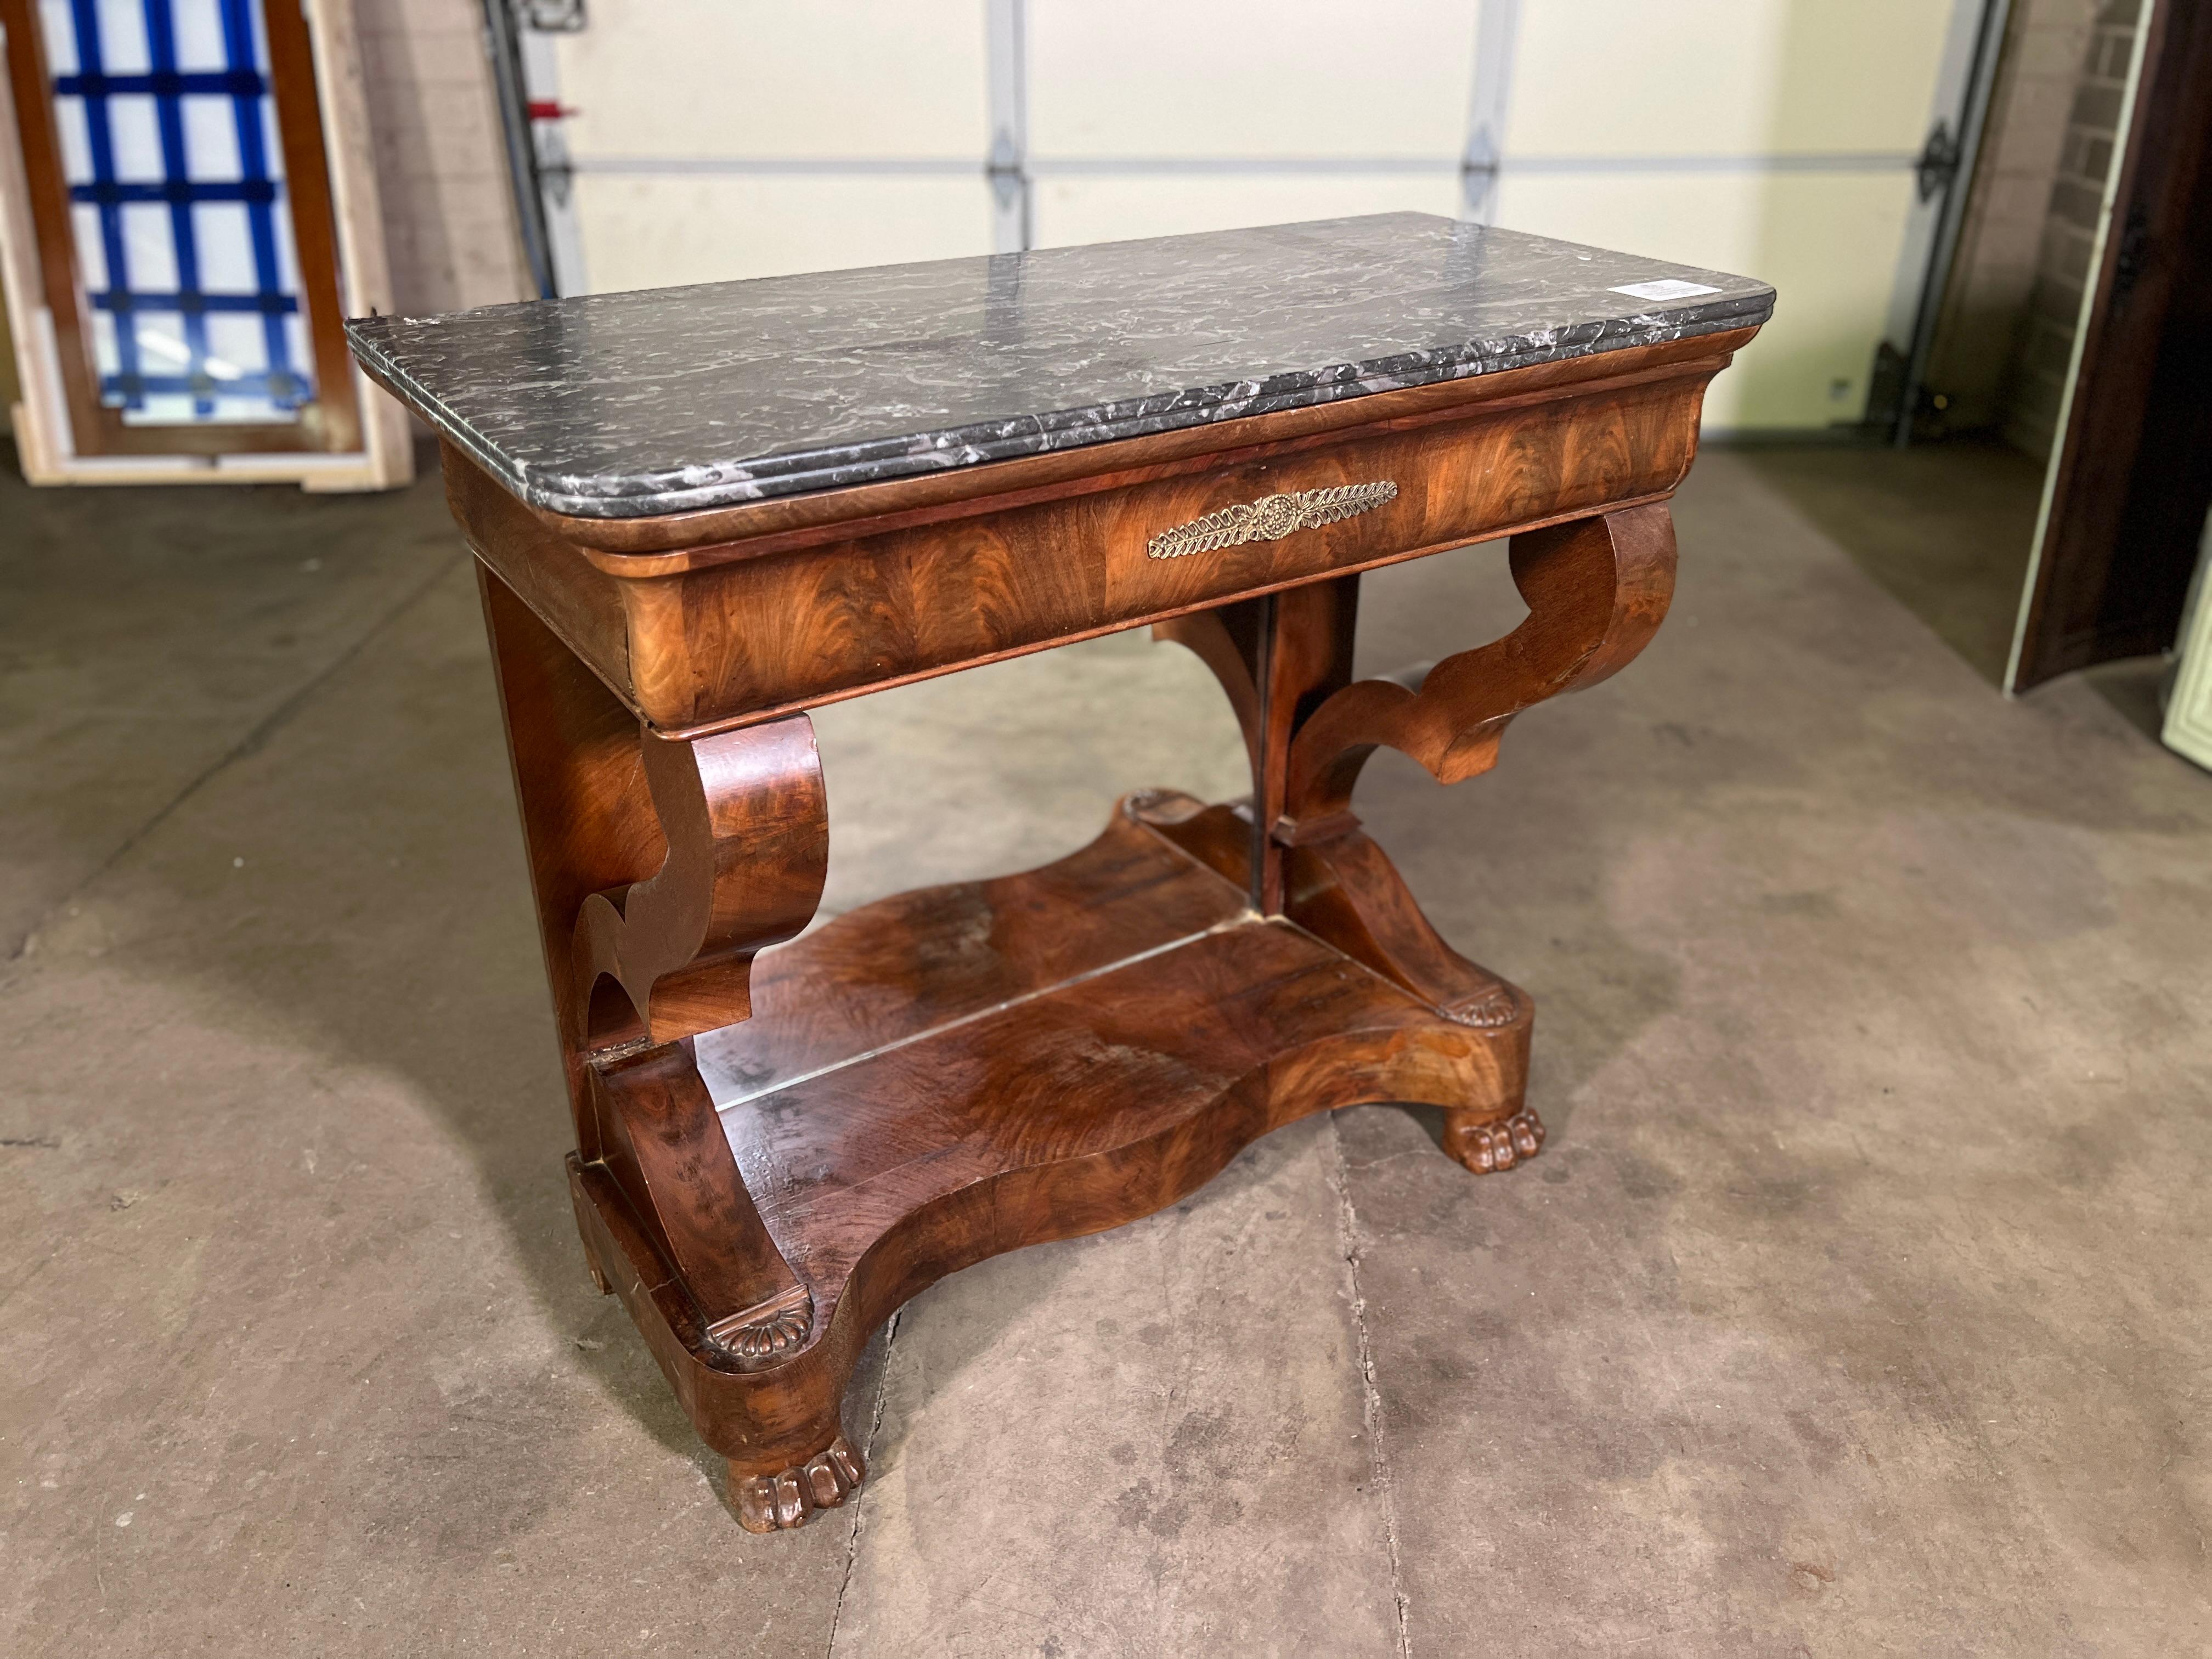 C1830 French Louis Philippe Console with Saint Anne Marble
Beautiful piece, see photos. 